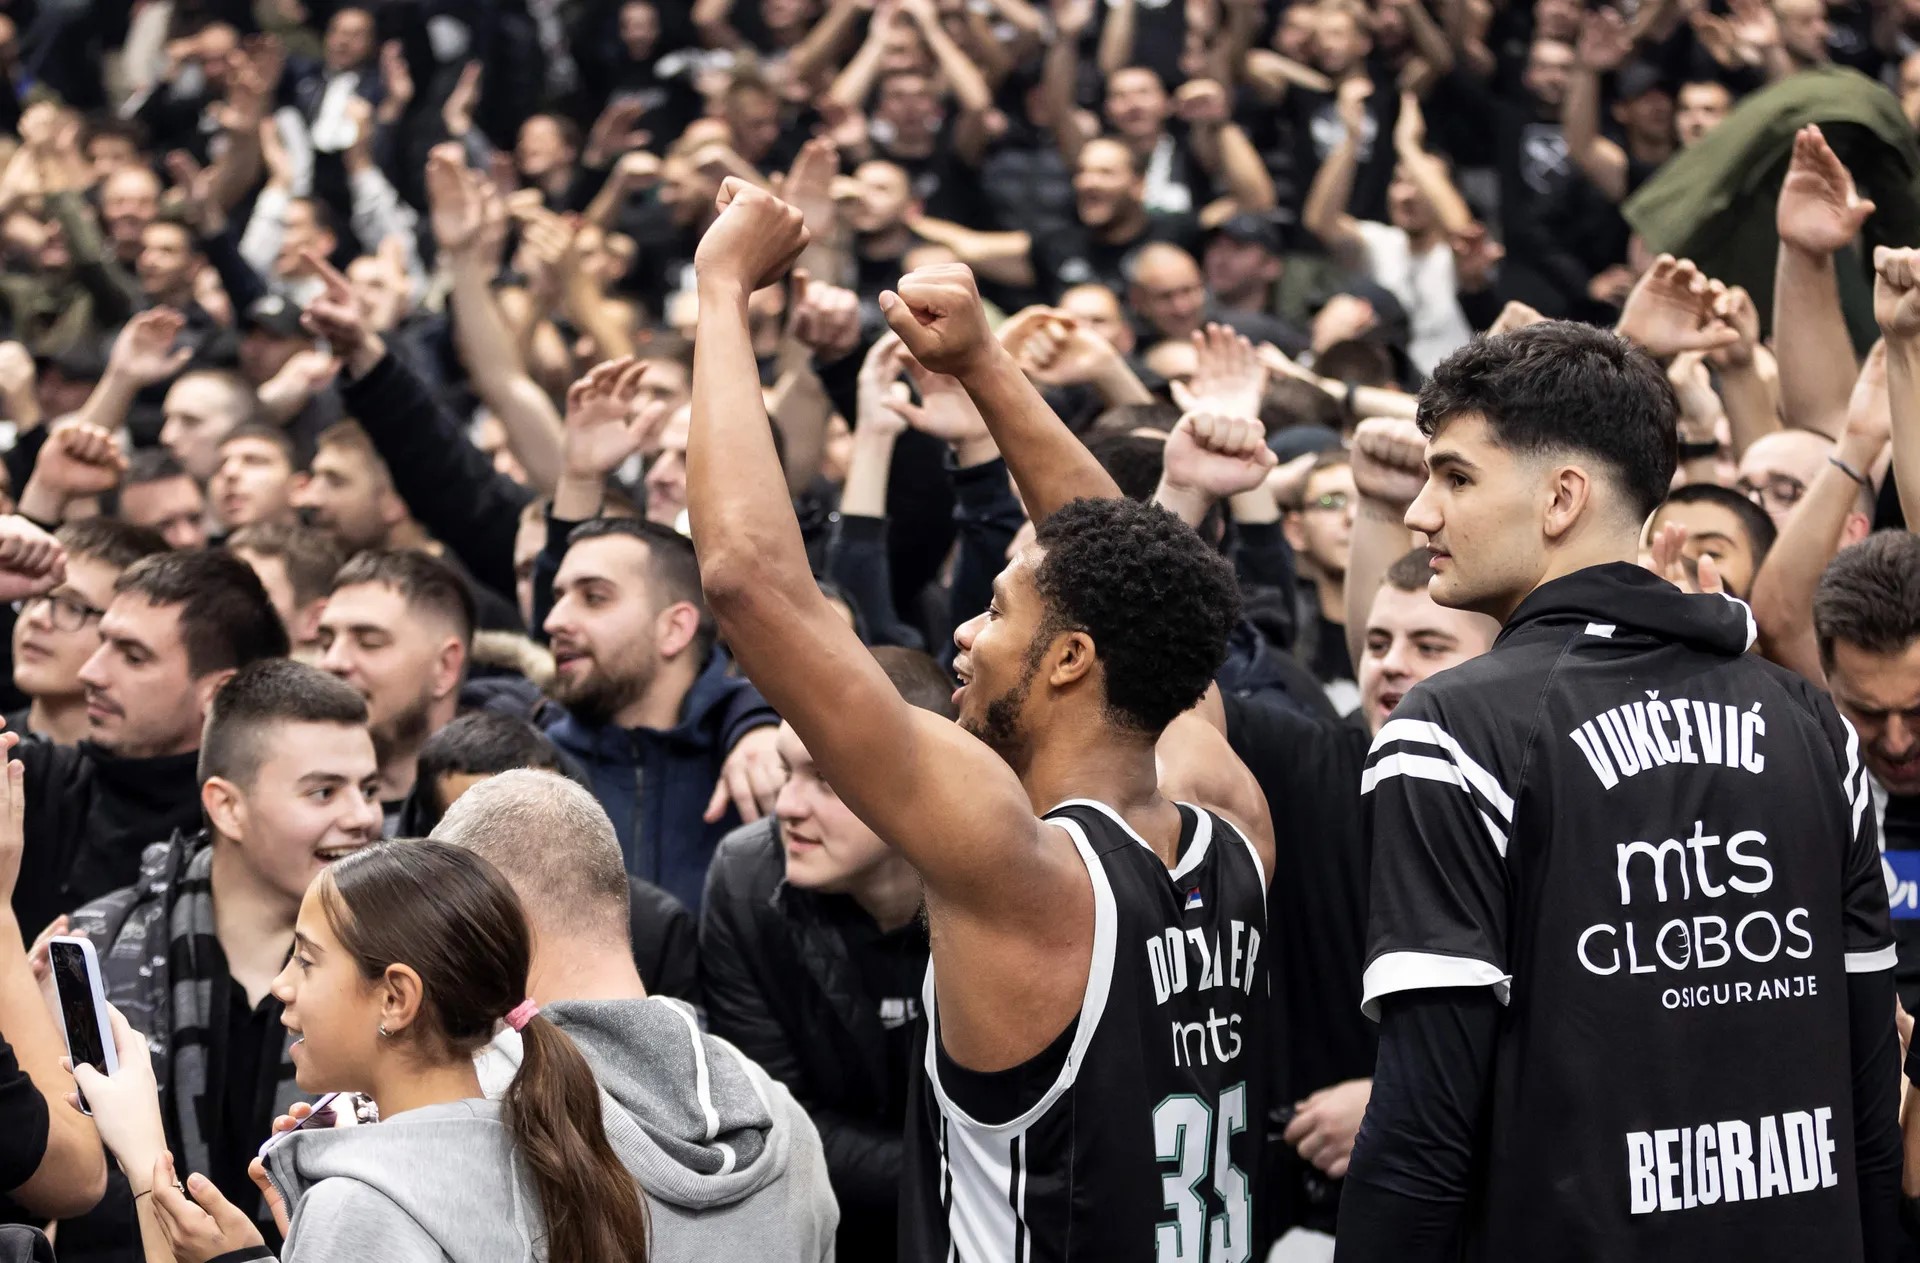 The fans of Partizan have won a viral following worldwide